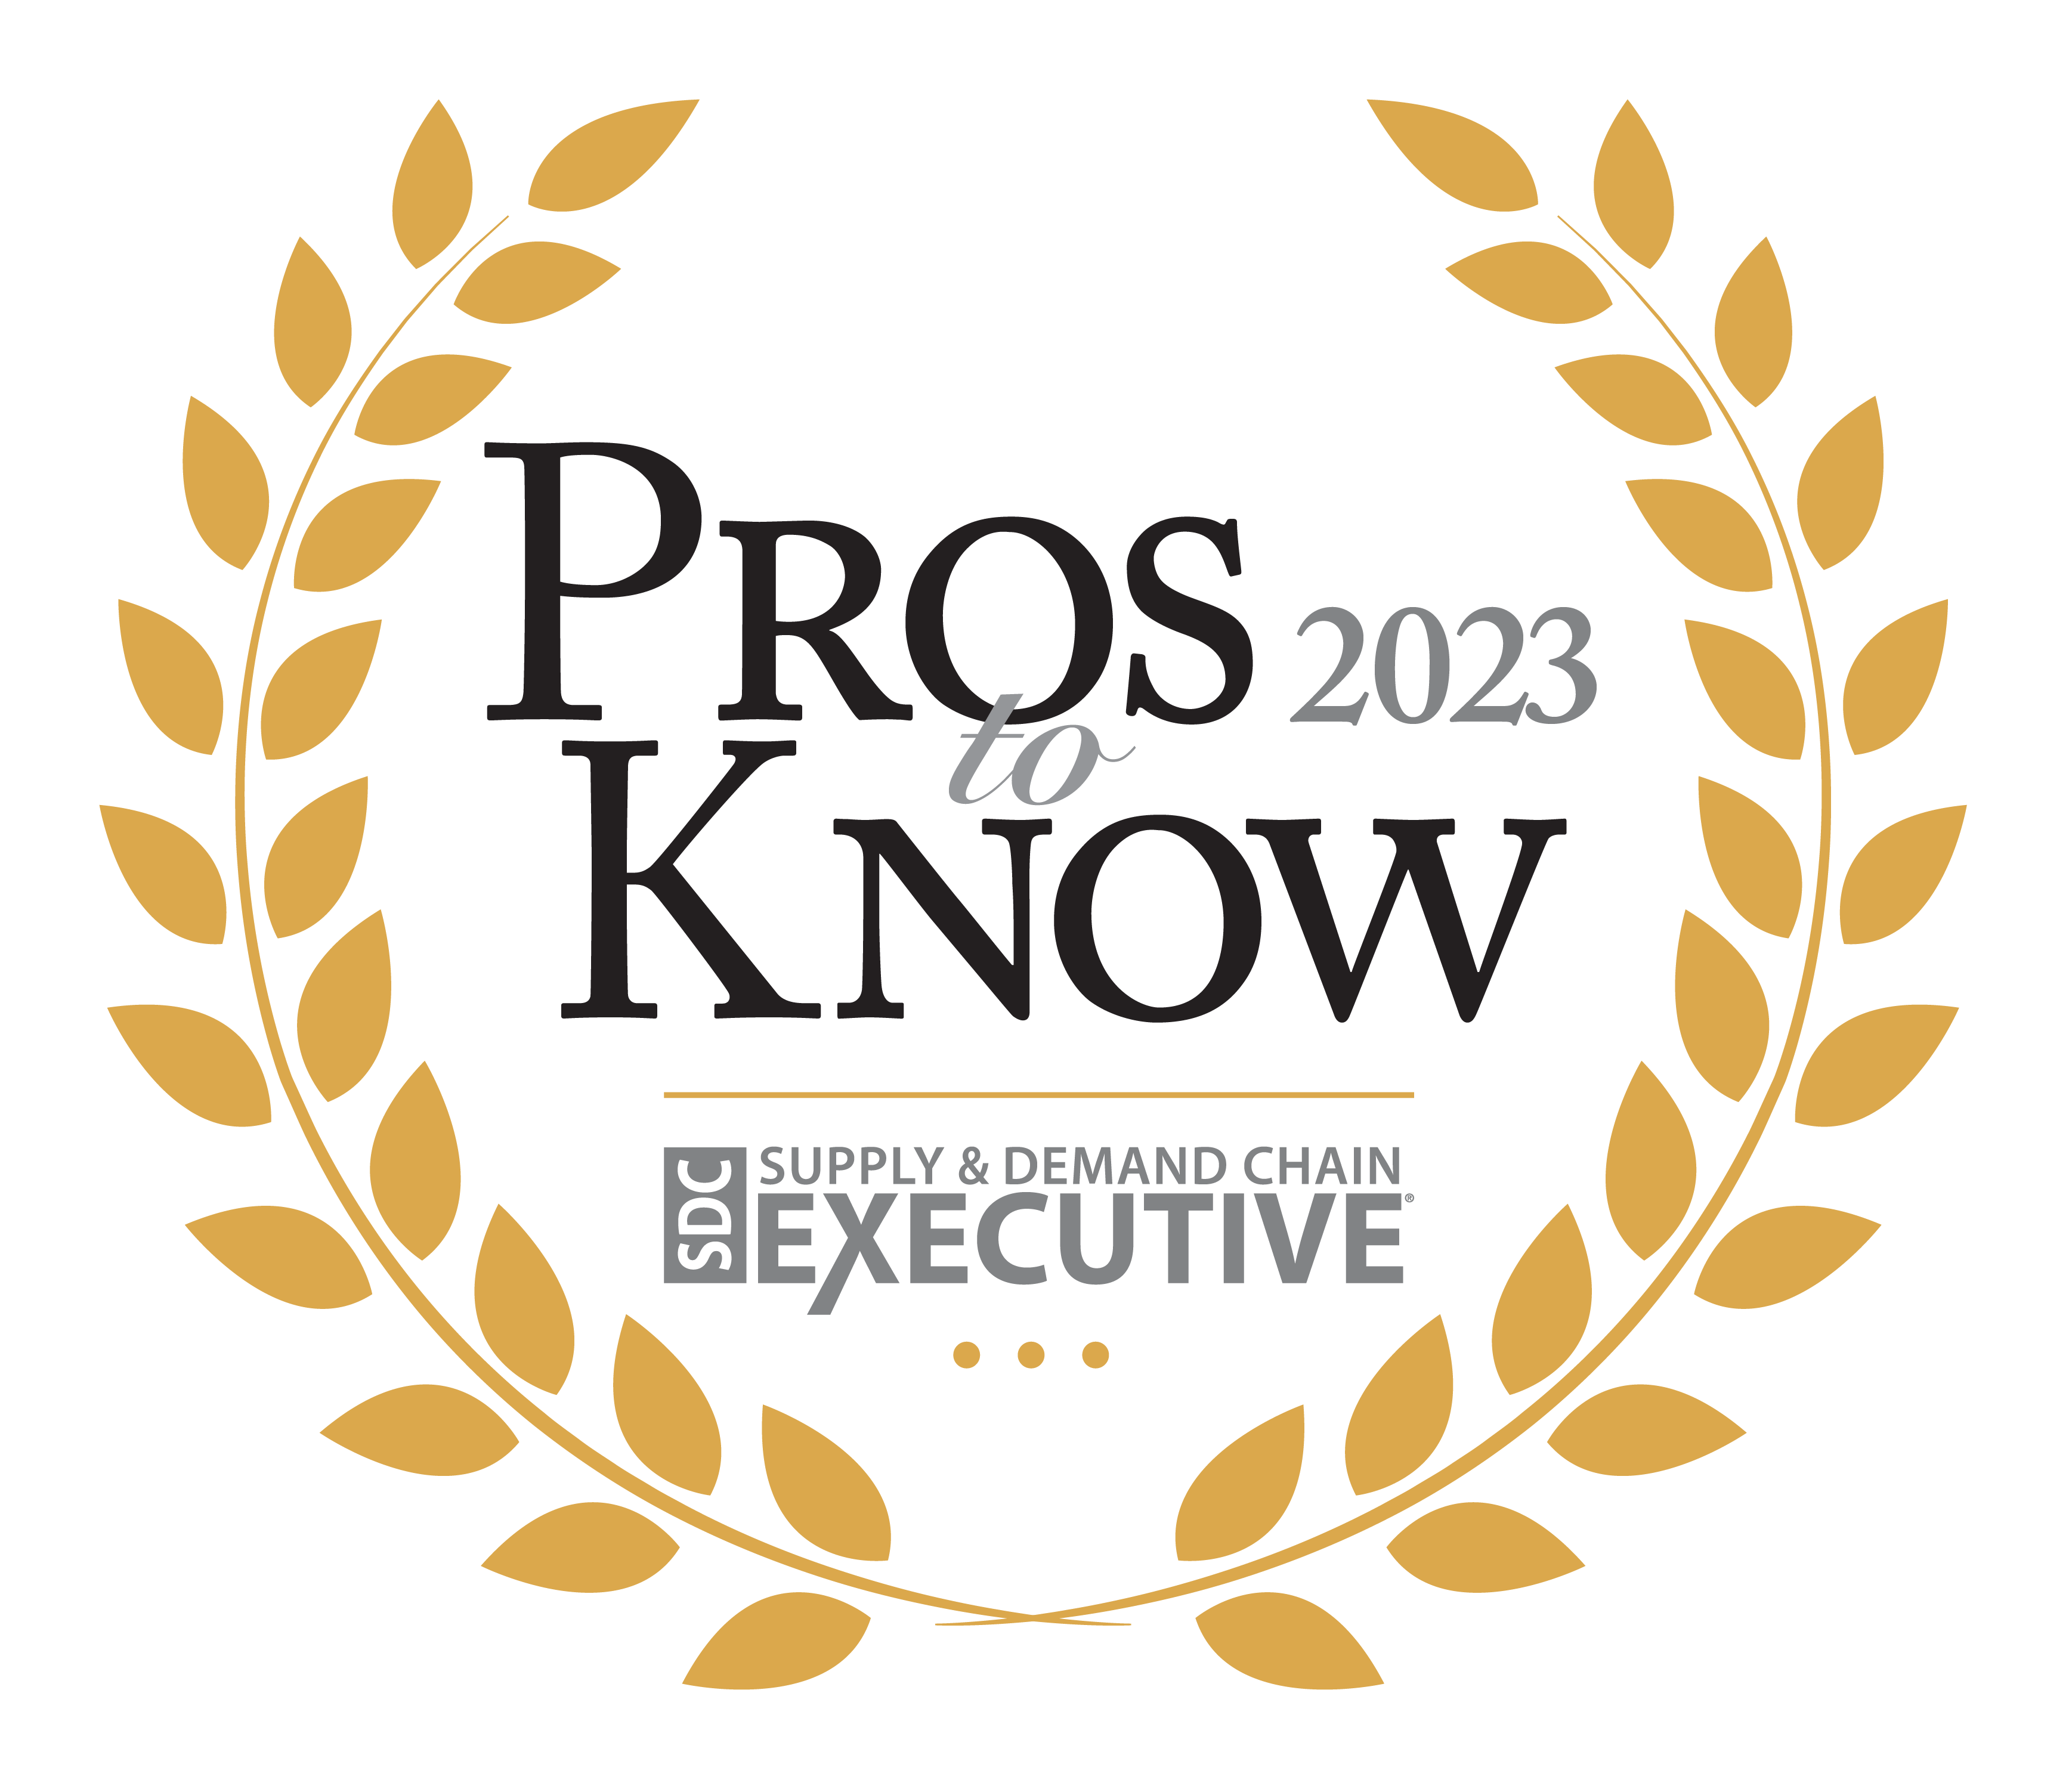 Bill Thayer, Fillogic CEO, Named to Supply & Demand Chain Executive 2023 Pros to Know List